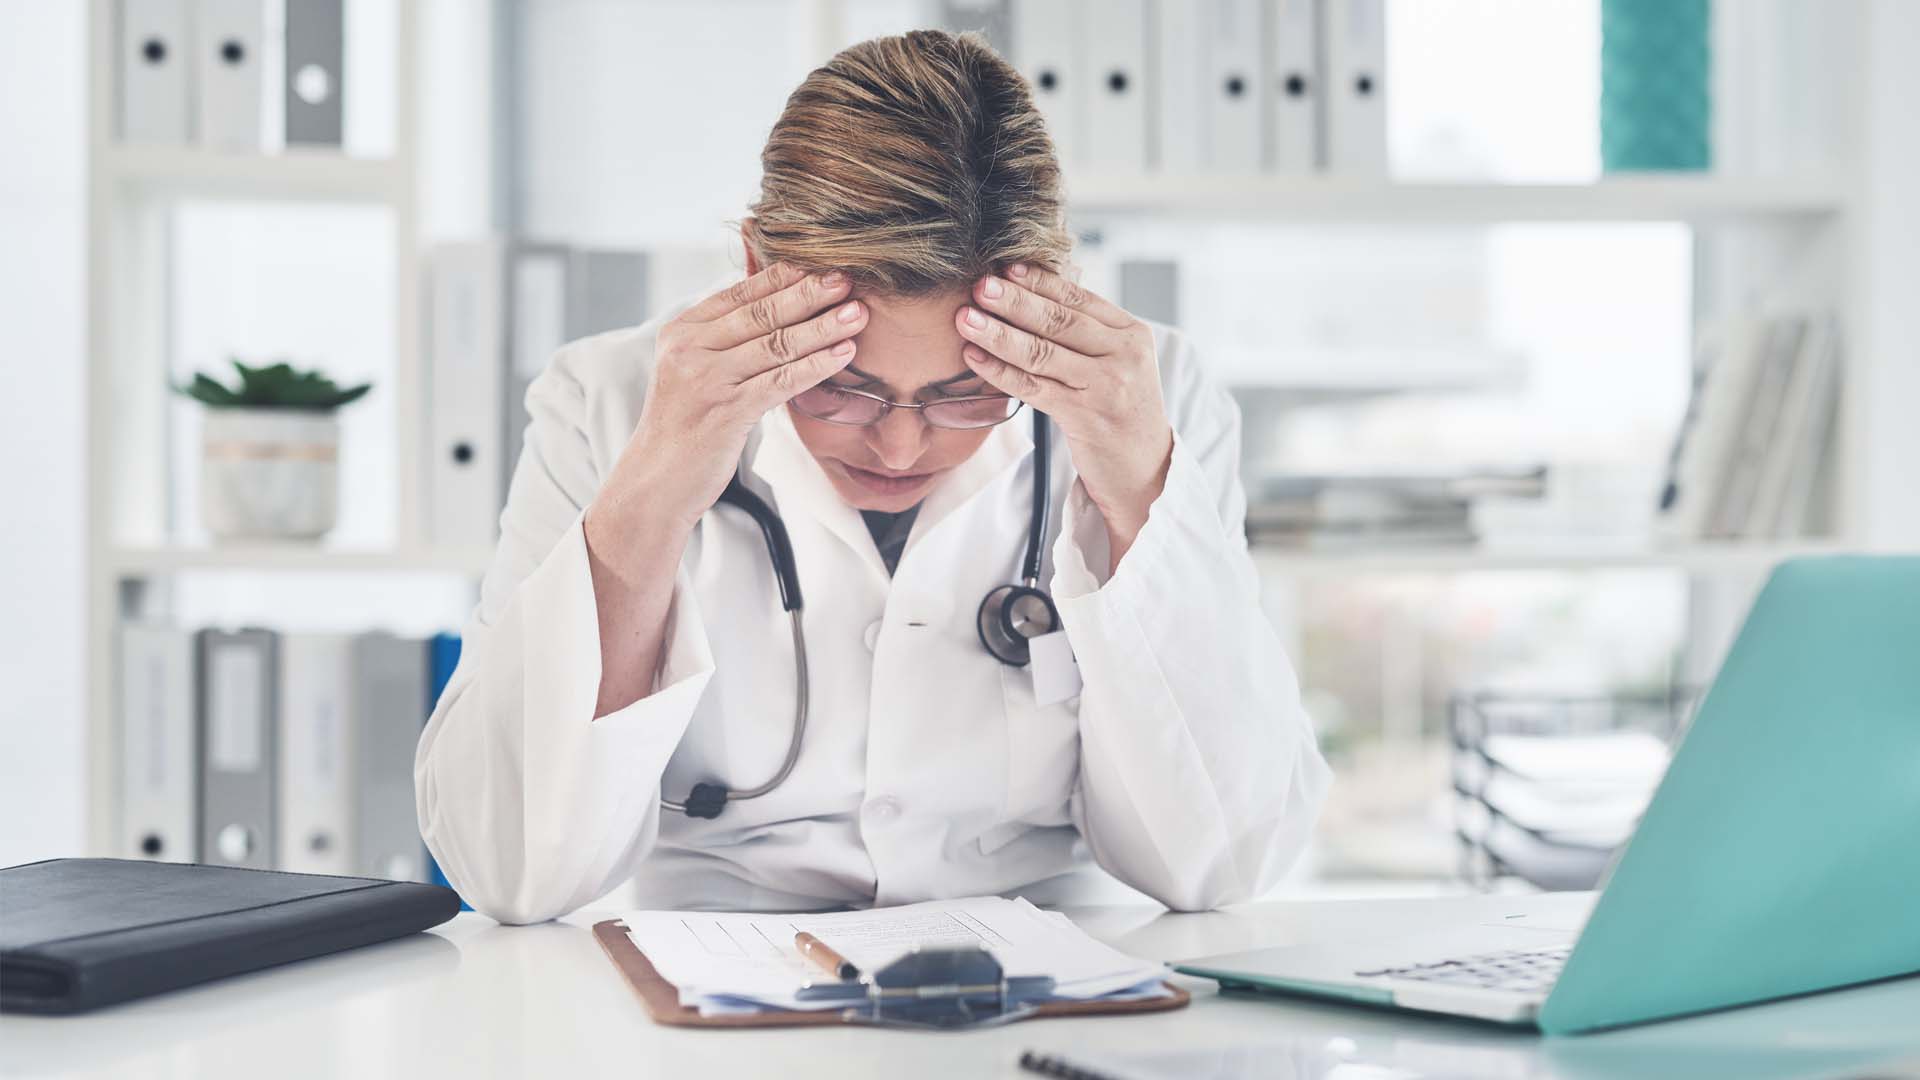 COVID-19 and Physician Burnout